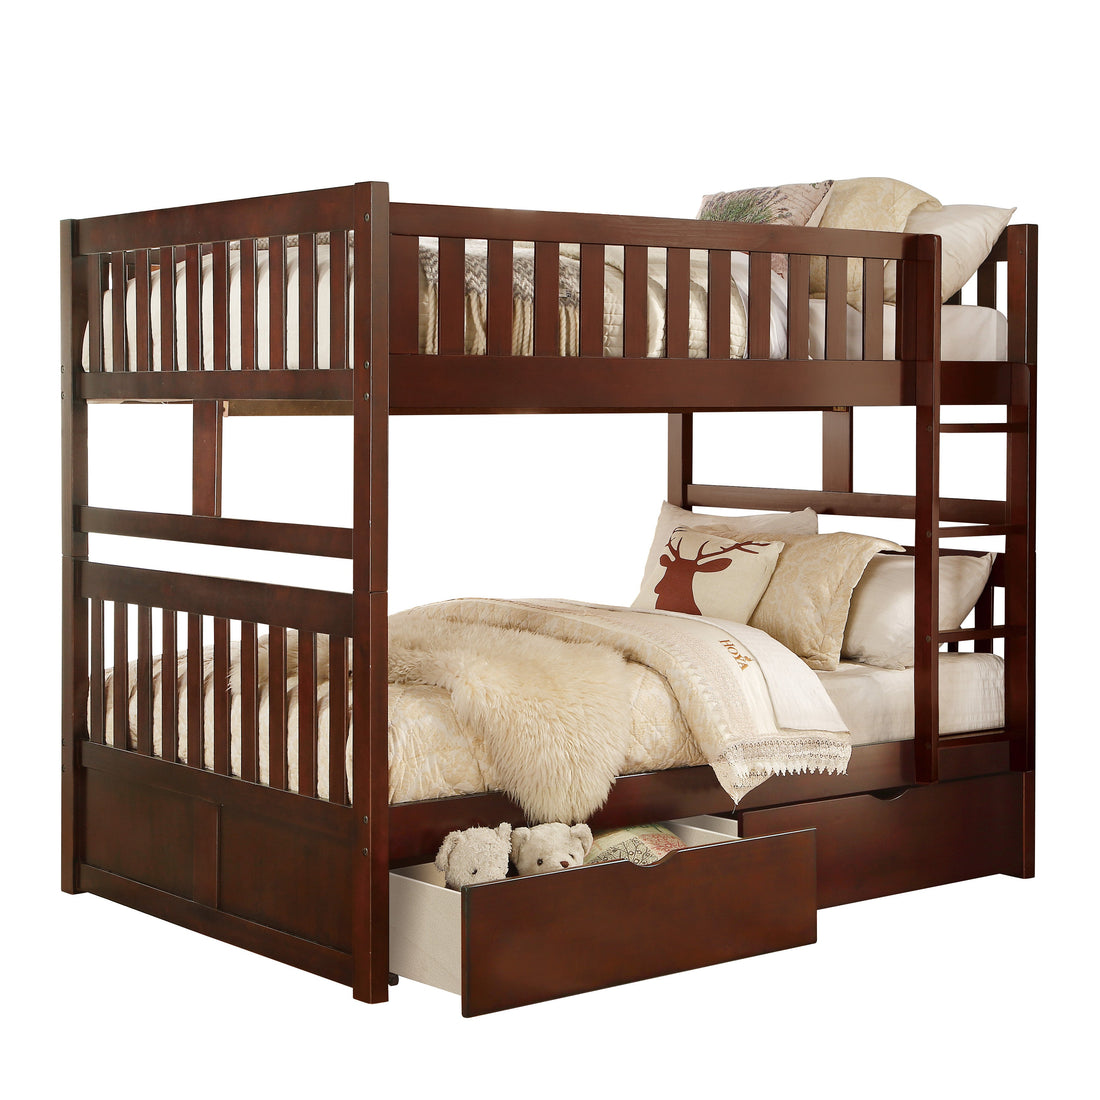 Rowe Dark Cherry Full/Full Bunk Bed with Storage Boxes - SET | B2013FFDC-1 | B2013FFDC-2 | B2013FFDC-SL | B2013DC-T - Bien Home Furniture &amp; Electronics